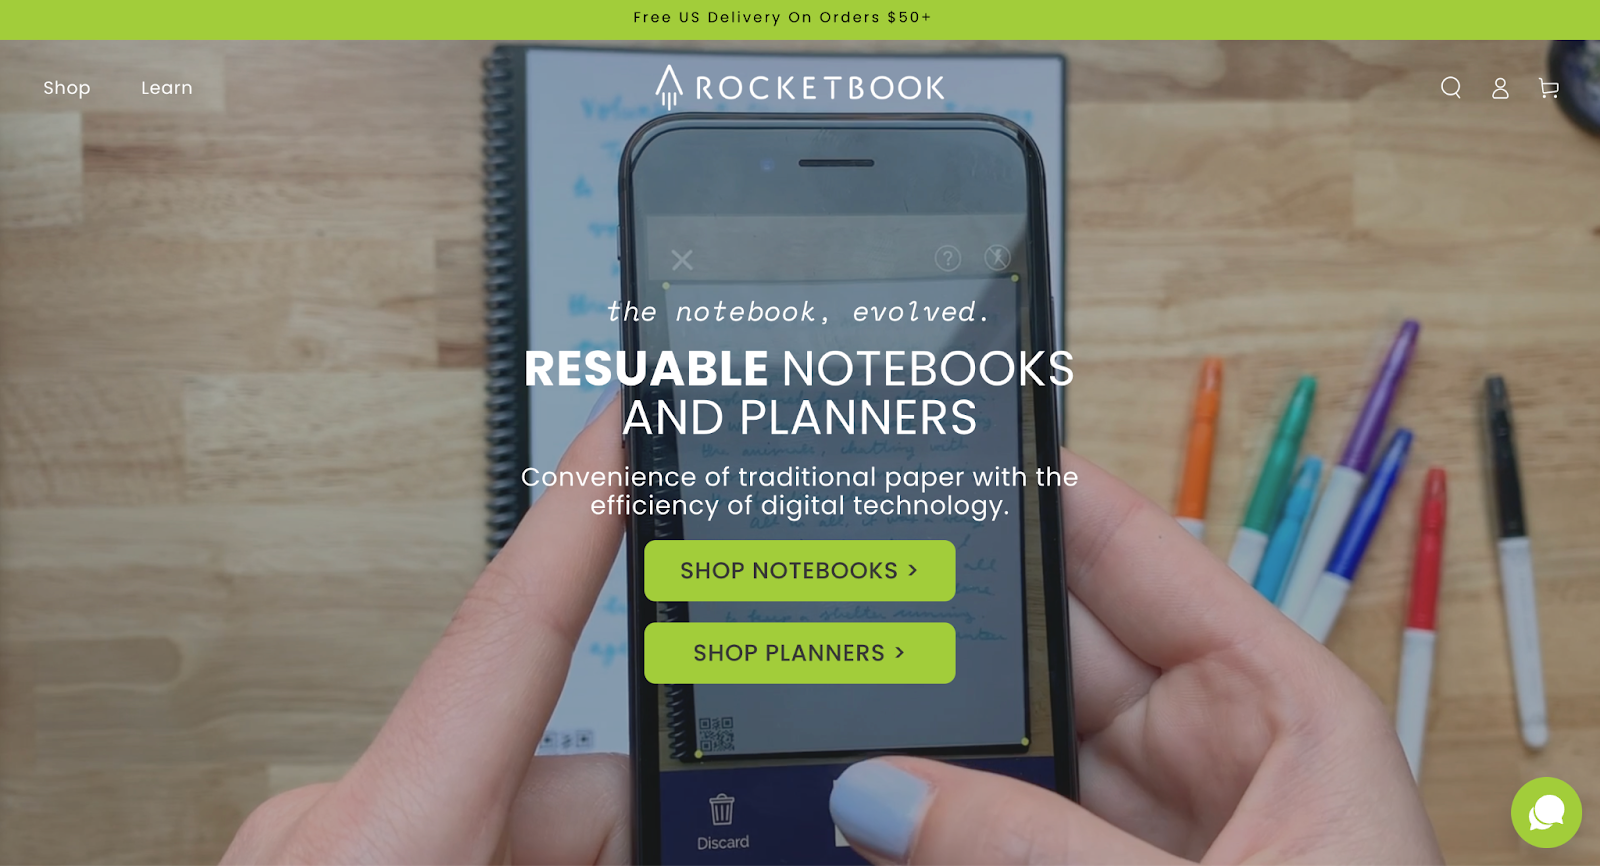 single product website example: Rocketbook